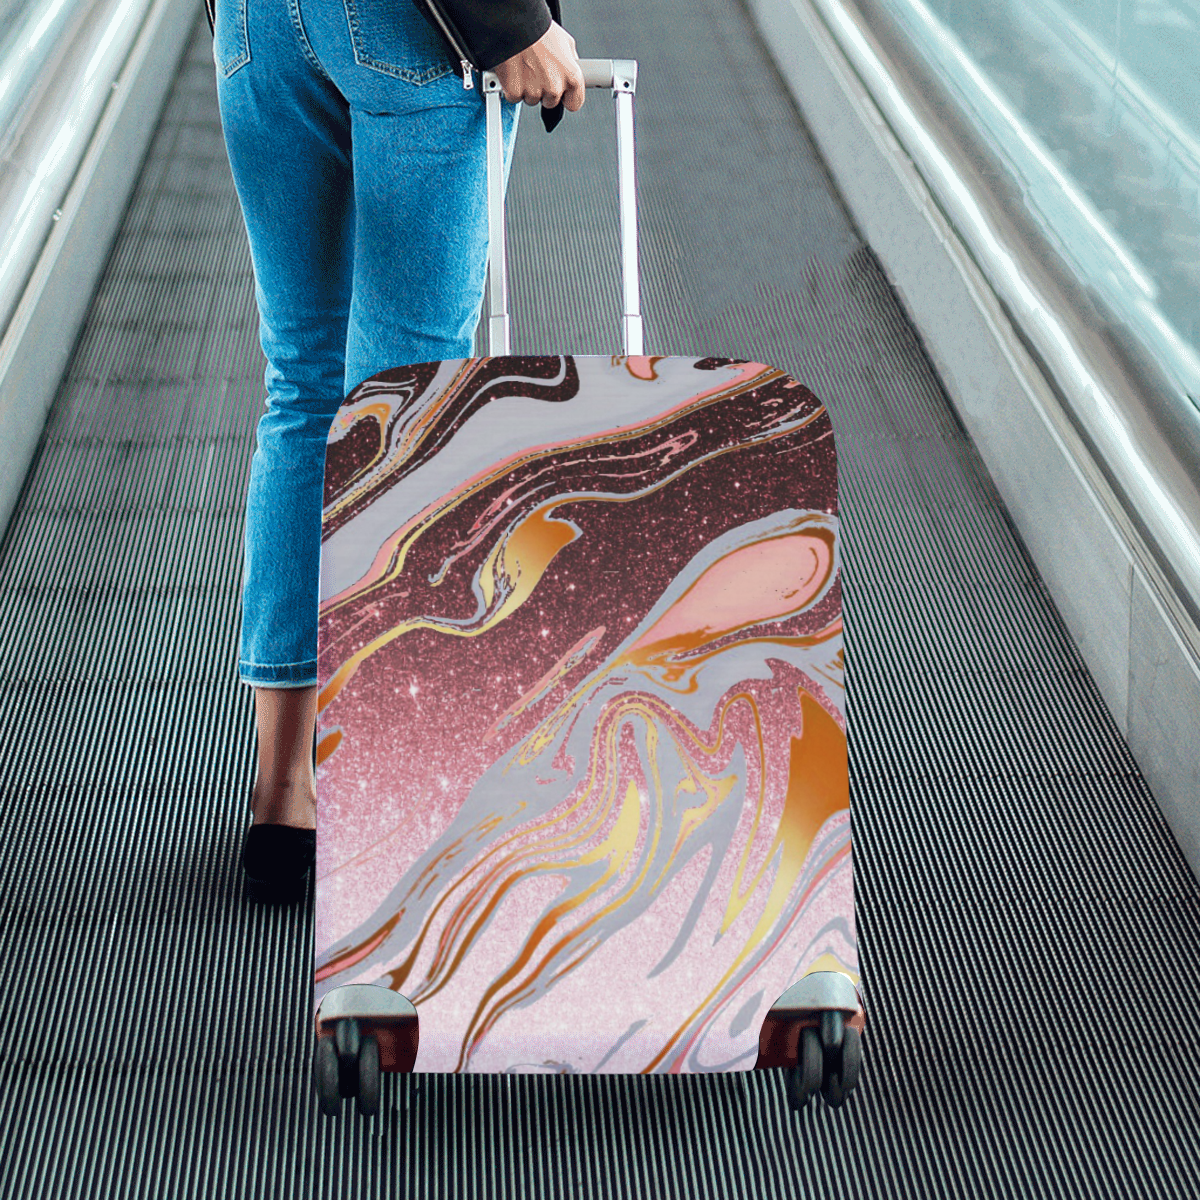 rose gold Glitter gradient marble Luggage Cover/Medium 22"-25"